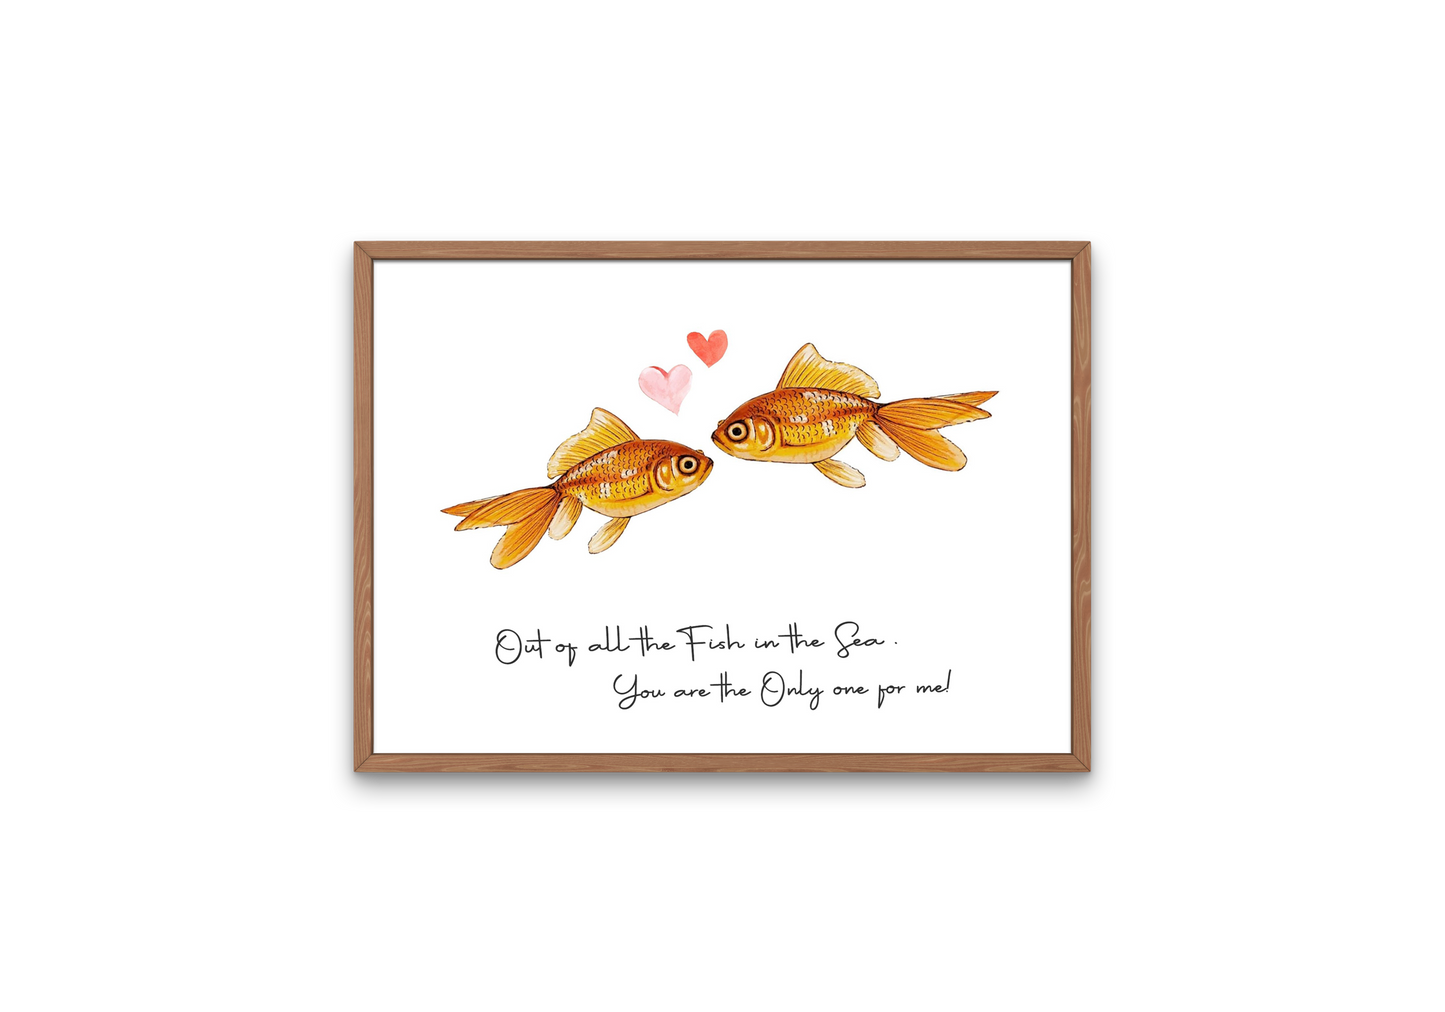 Out of all the fish in the sea you are the only one for me, Living room art, Cute wall decor, Bedroom art, Art for girlfriend, Home decor